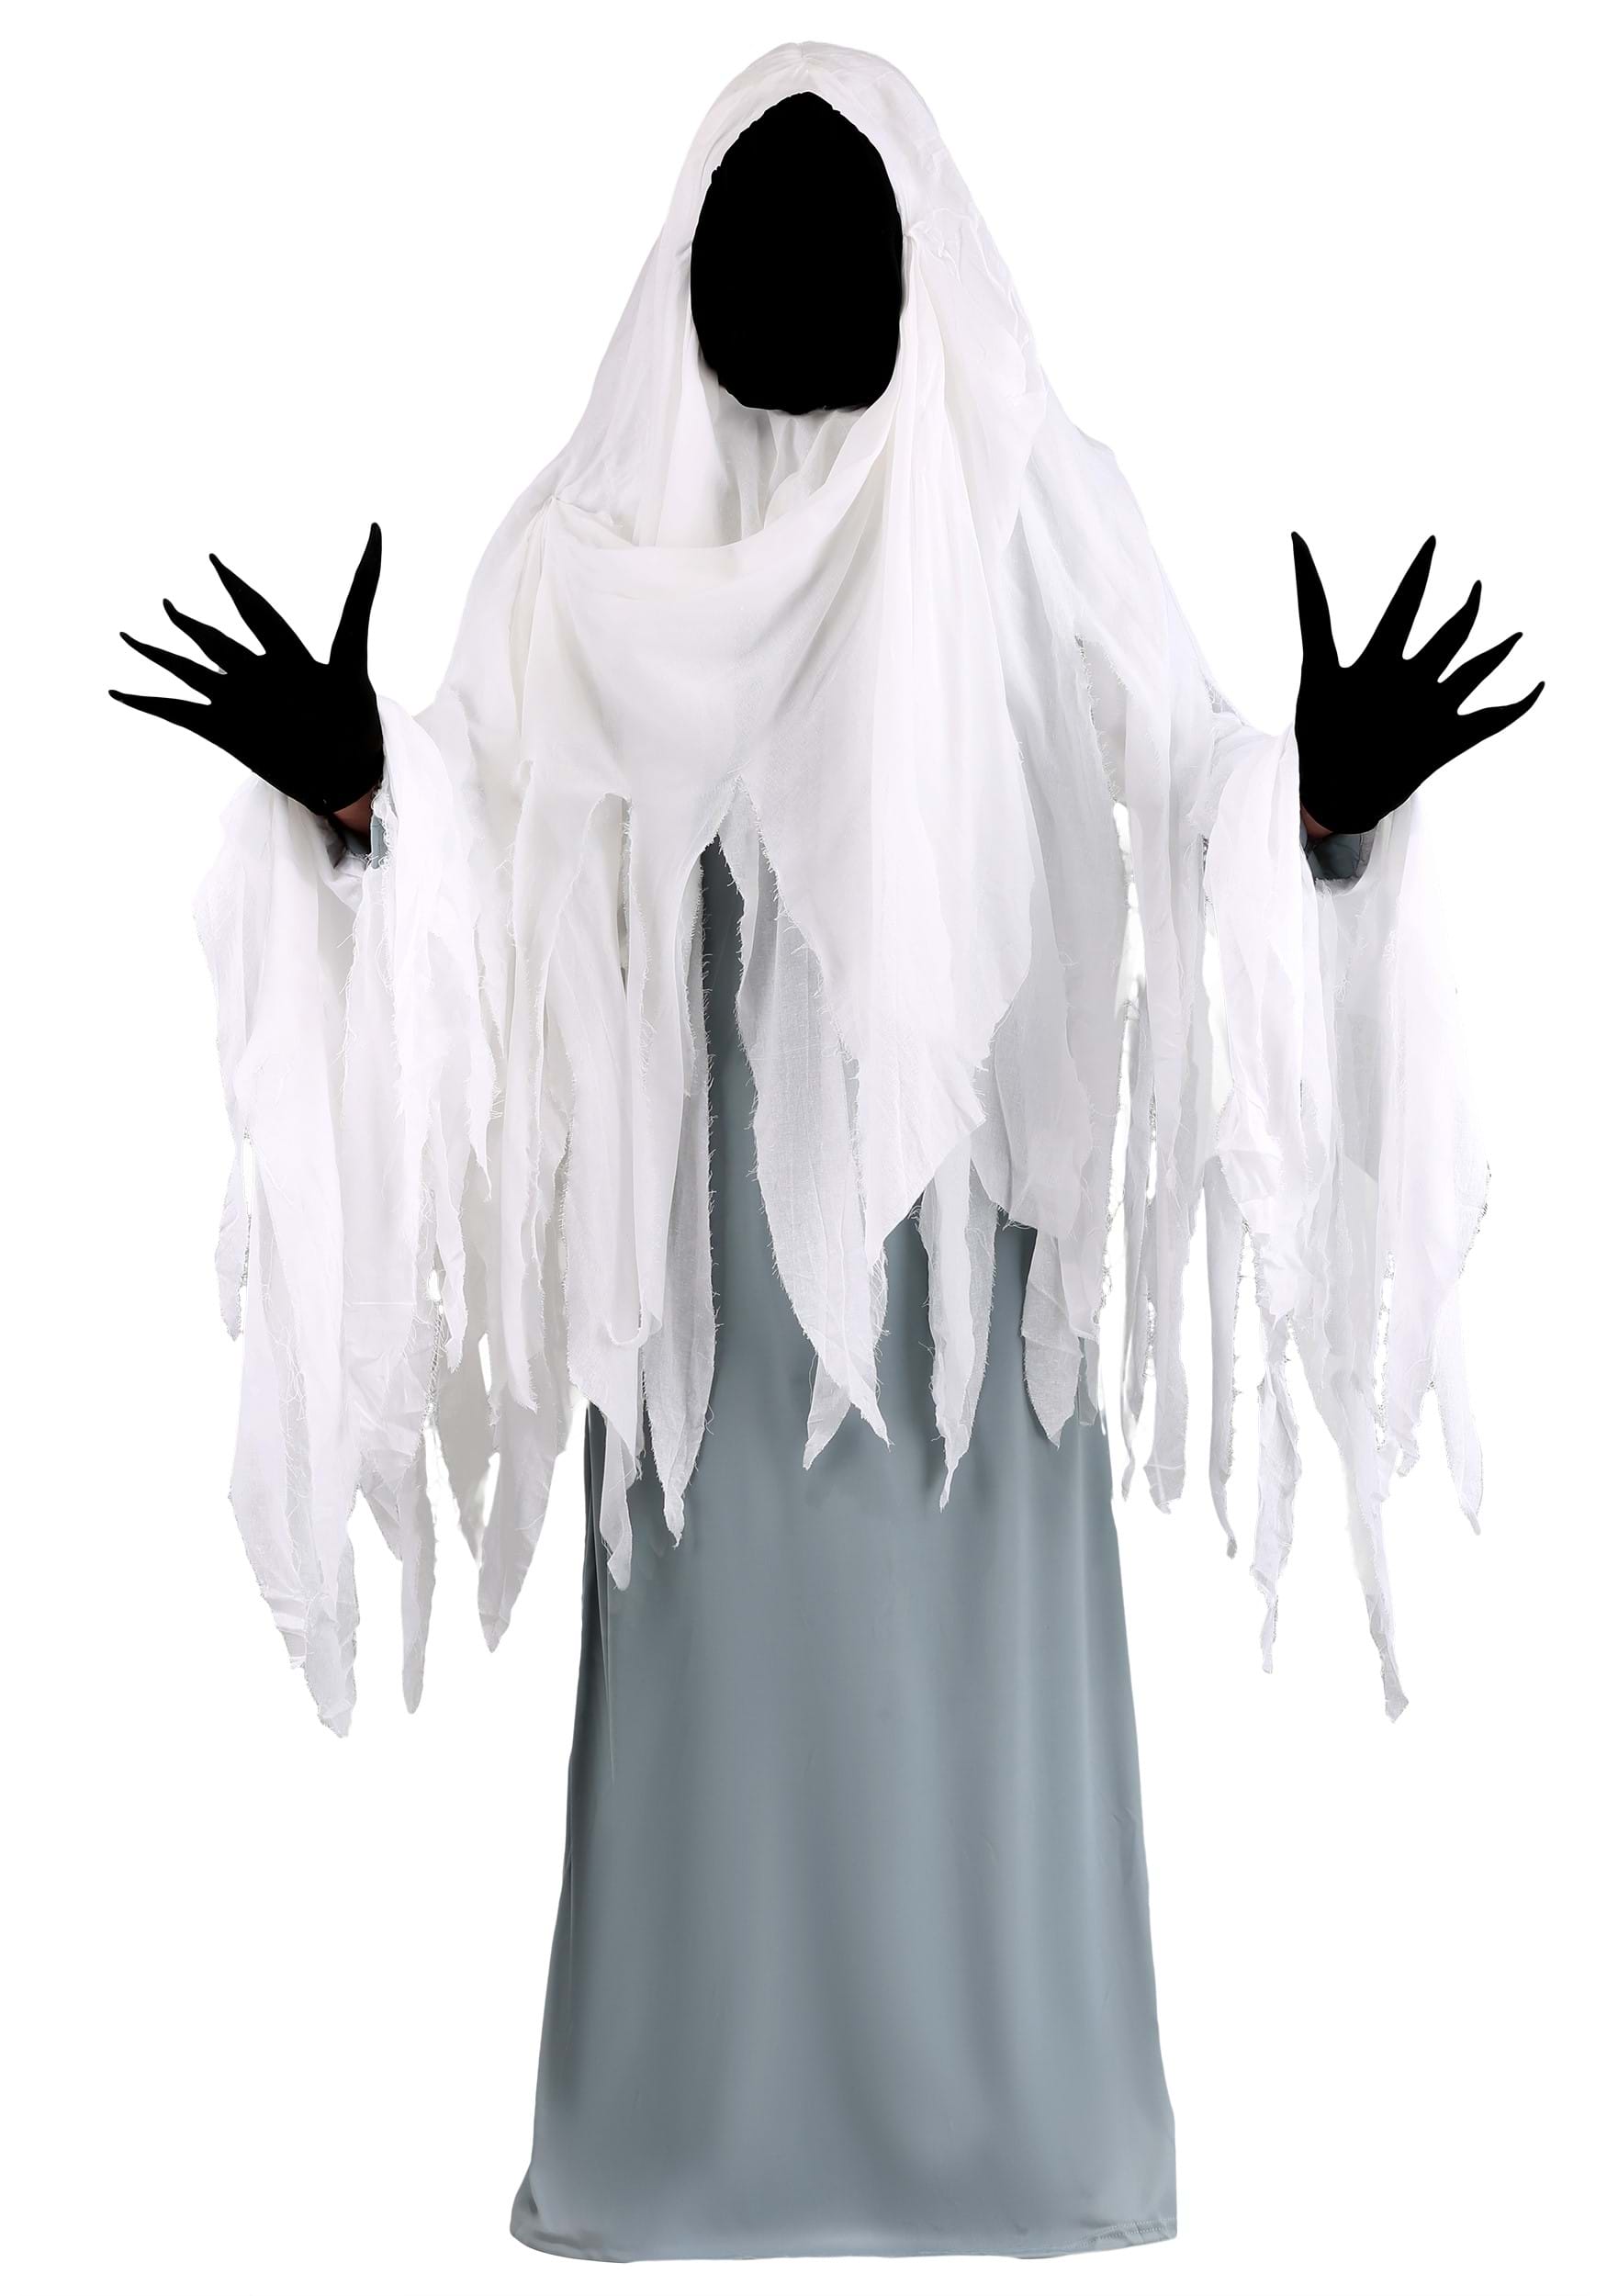 Photos - Fancy Dress GHOST FUN Costumes Spooky  Adult Costume Black/Gray/White FUN6053AD 